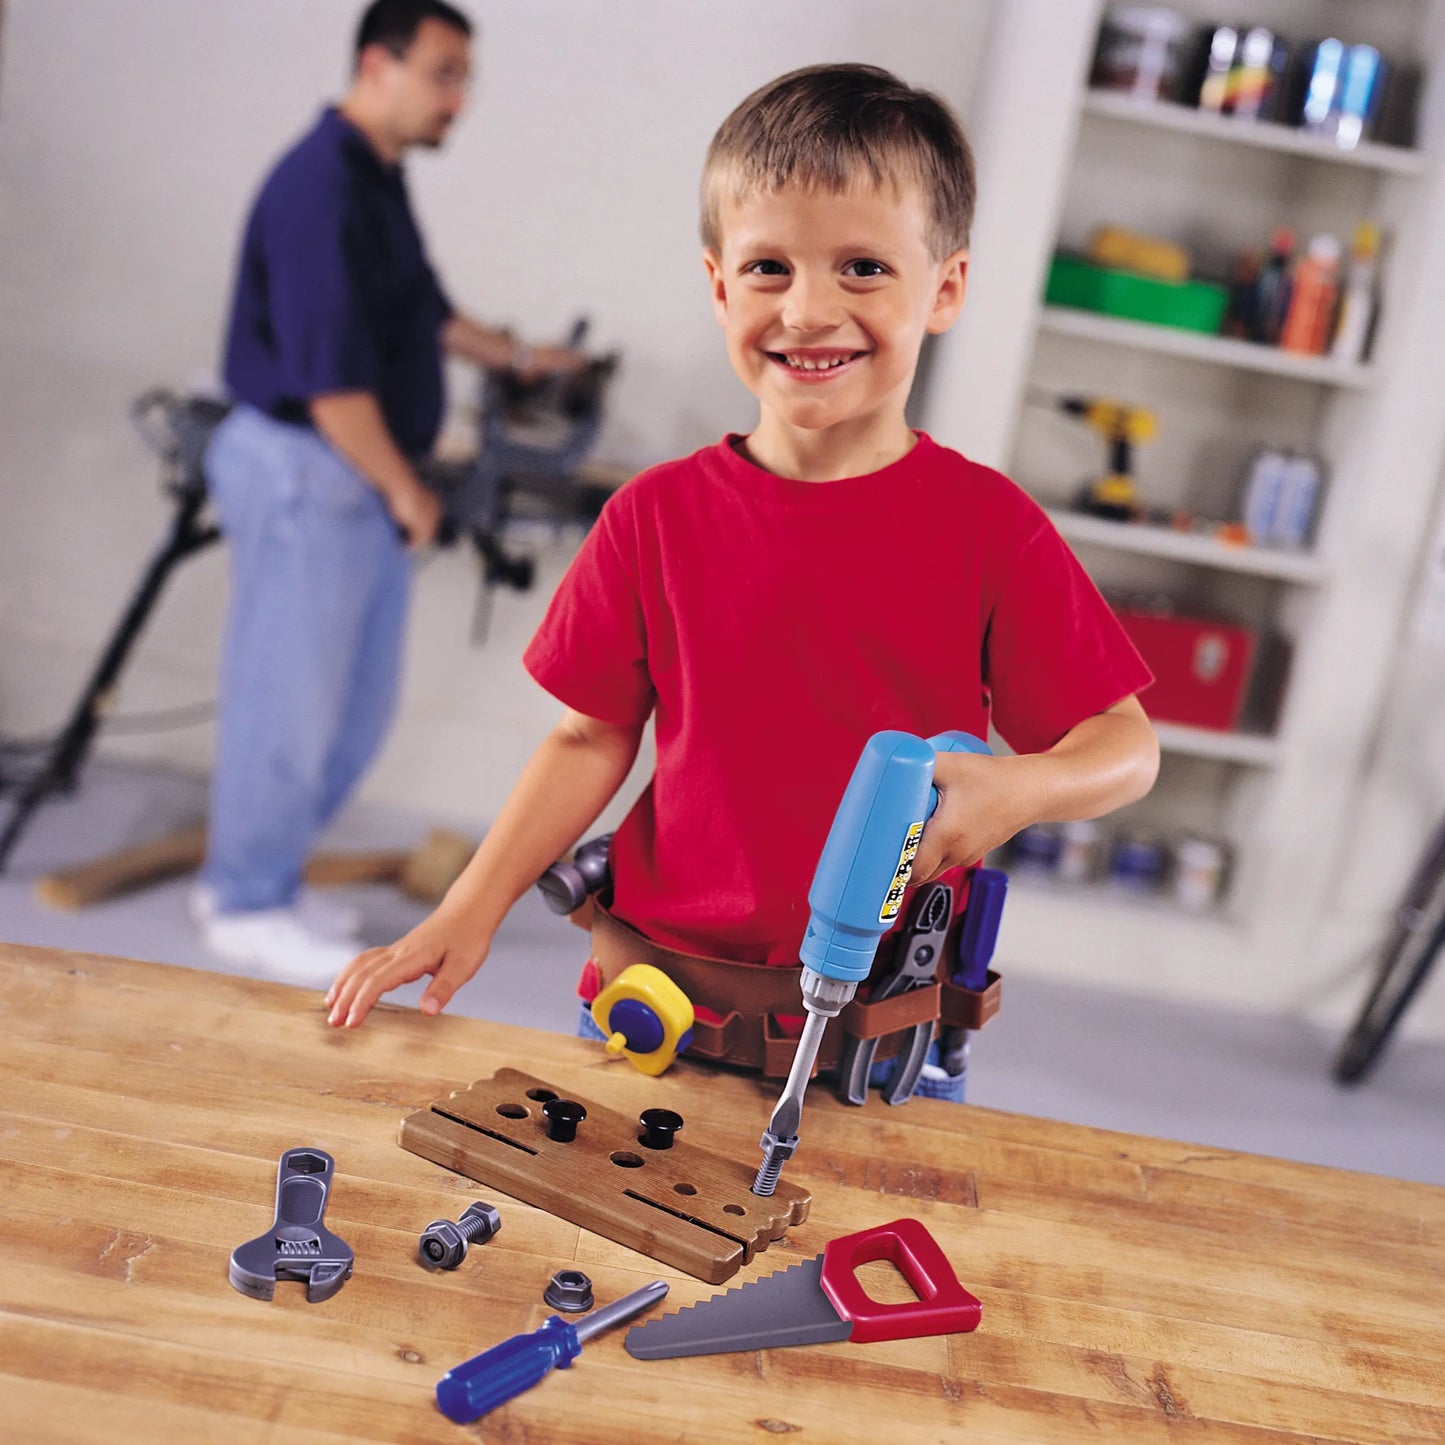 ﻿ Learning Resources Pretend & Play Work Belt Tool Set